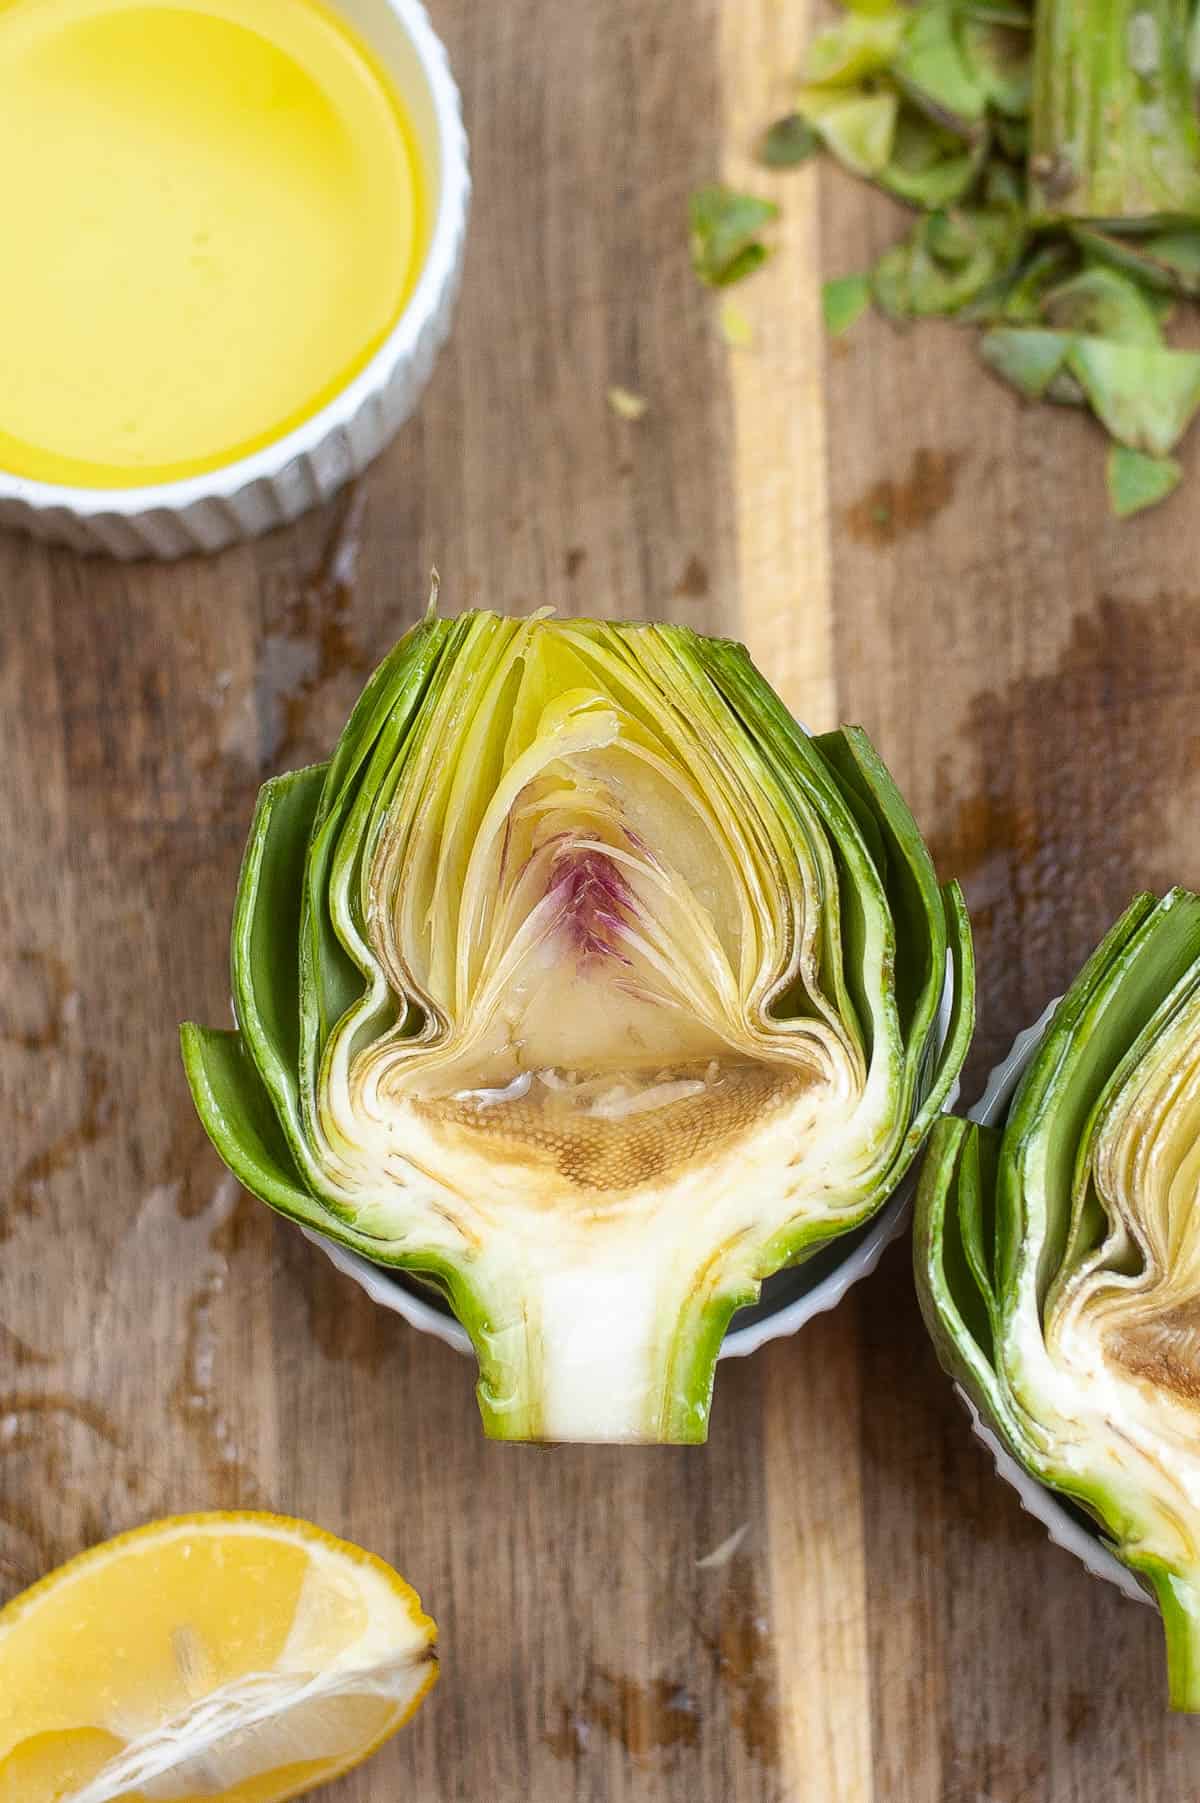 Air-fried artichokes served with lemon wedges on a wooden cutting board.